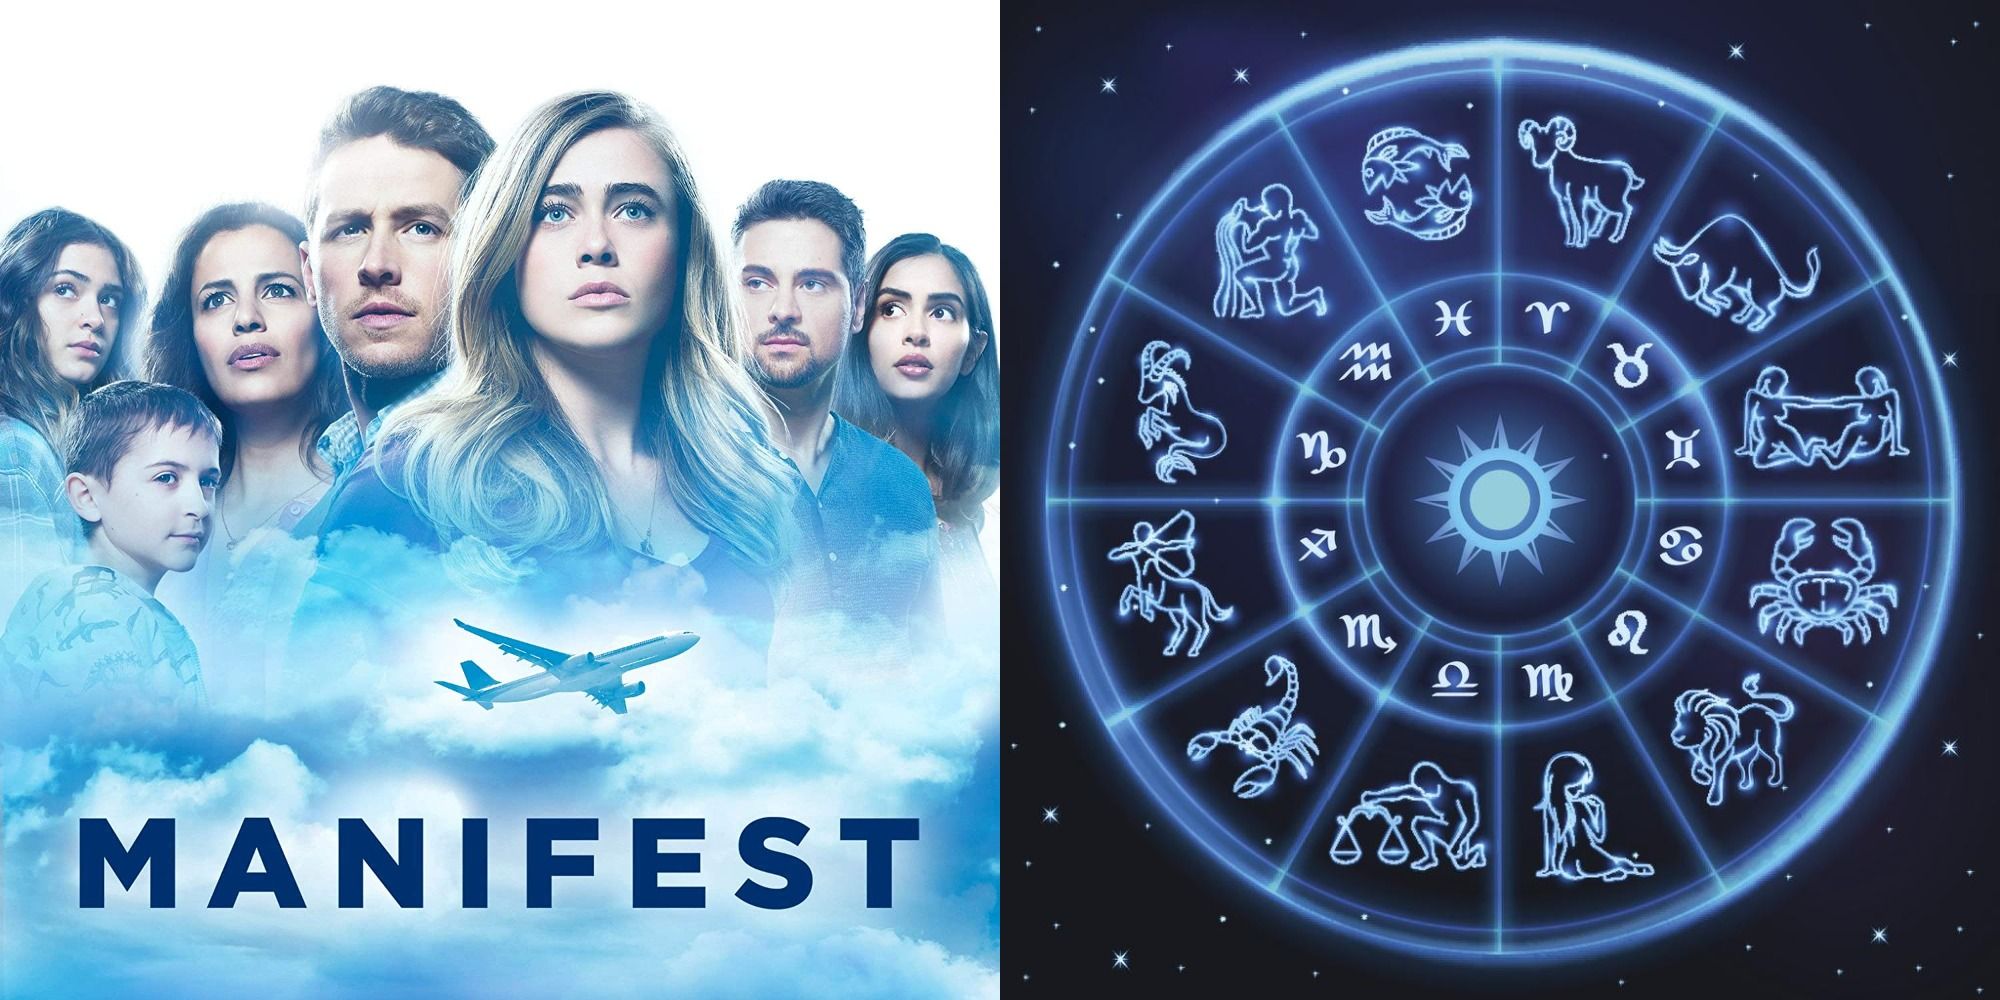 Manifest Which Character Are You Based On Your Zodiac Sign